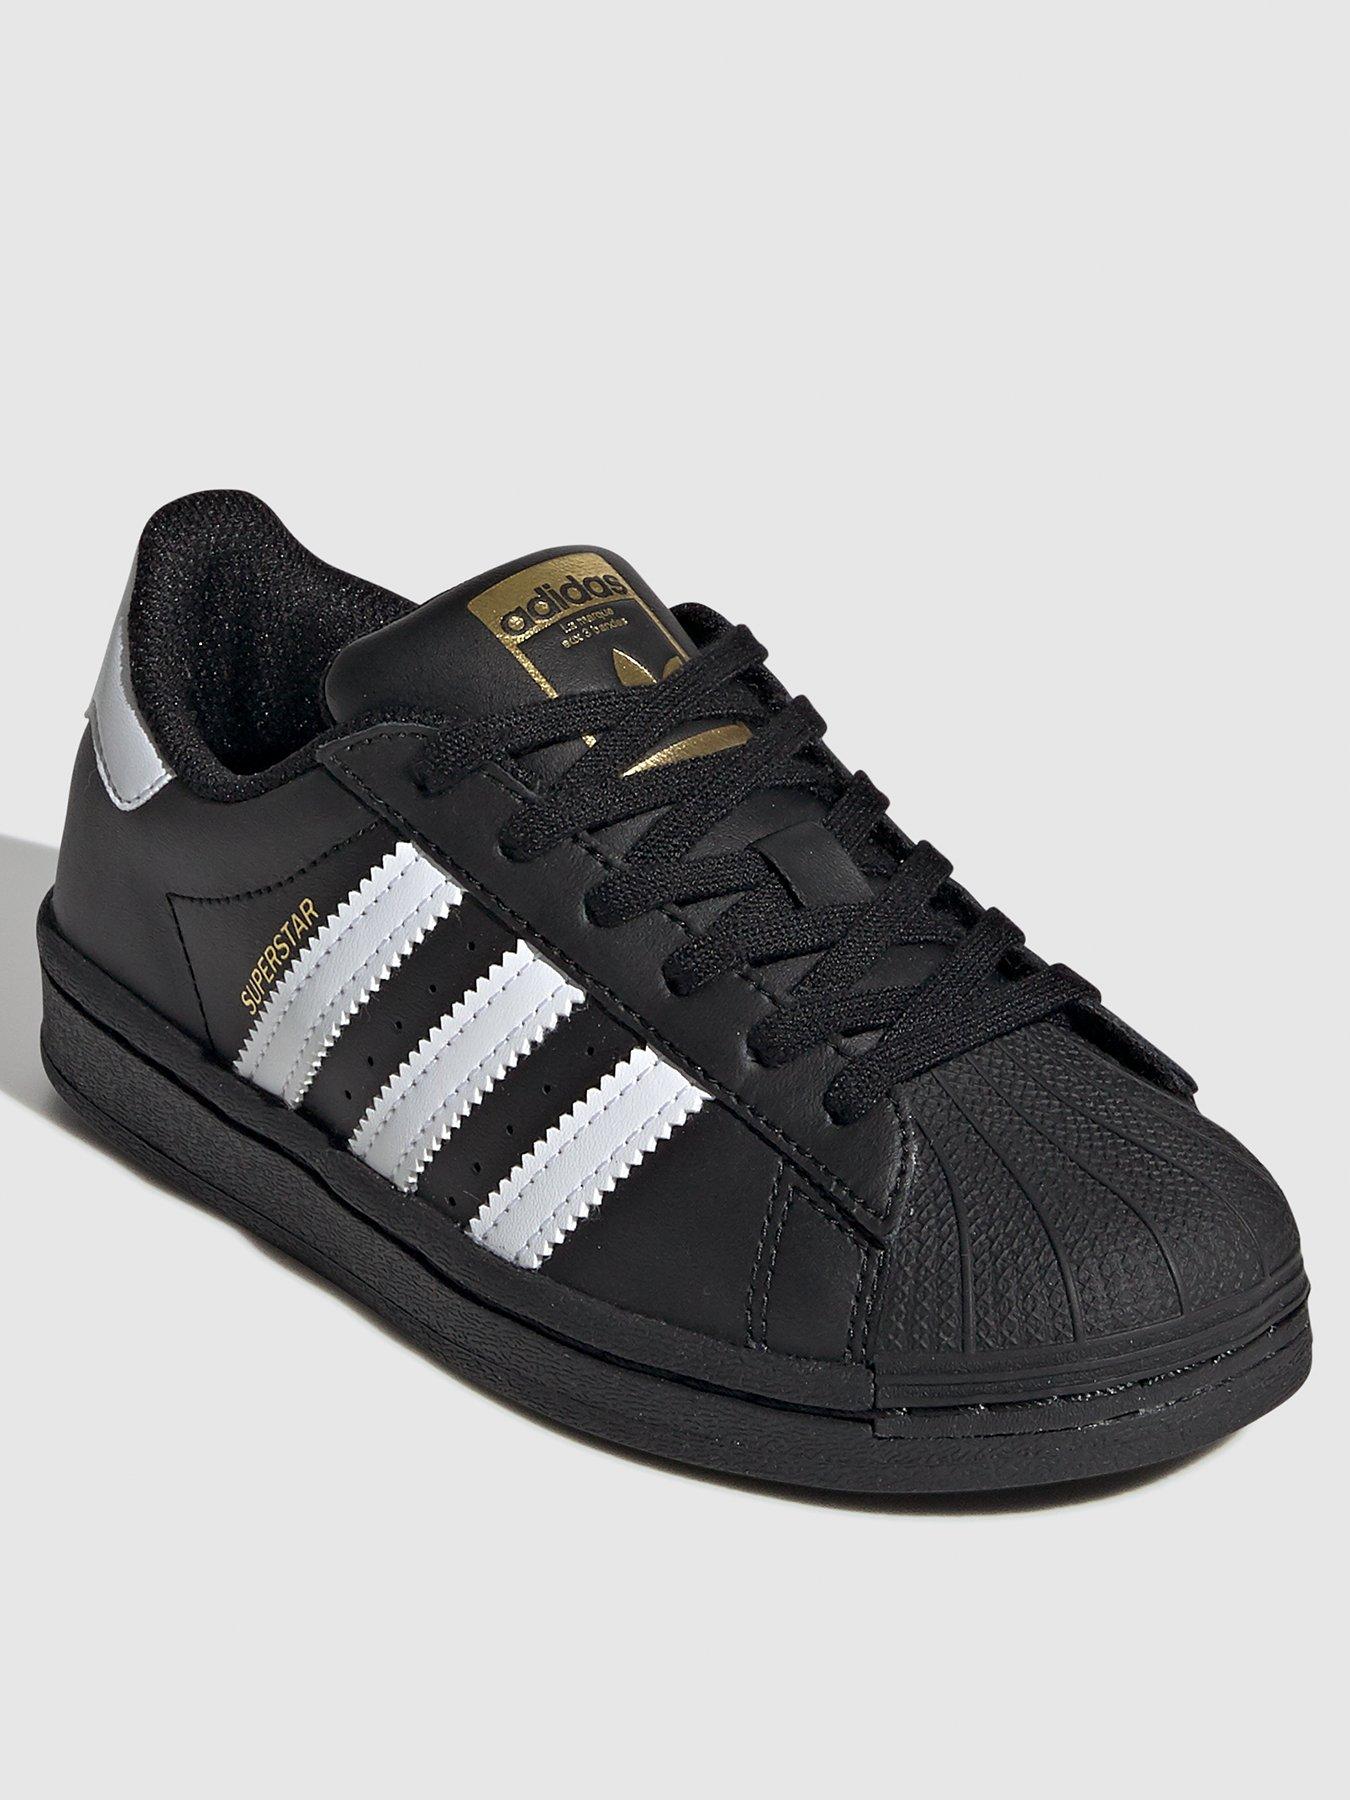 adidas superstar trainers size 1